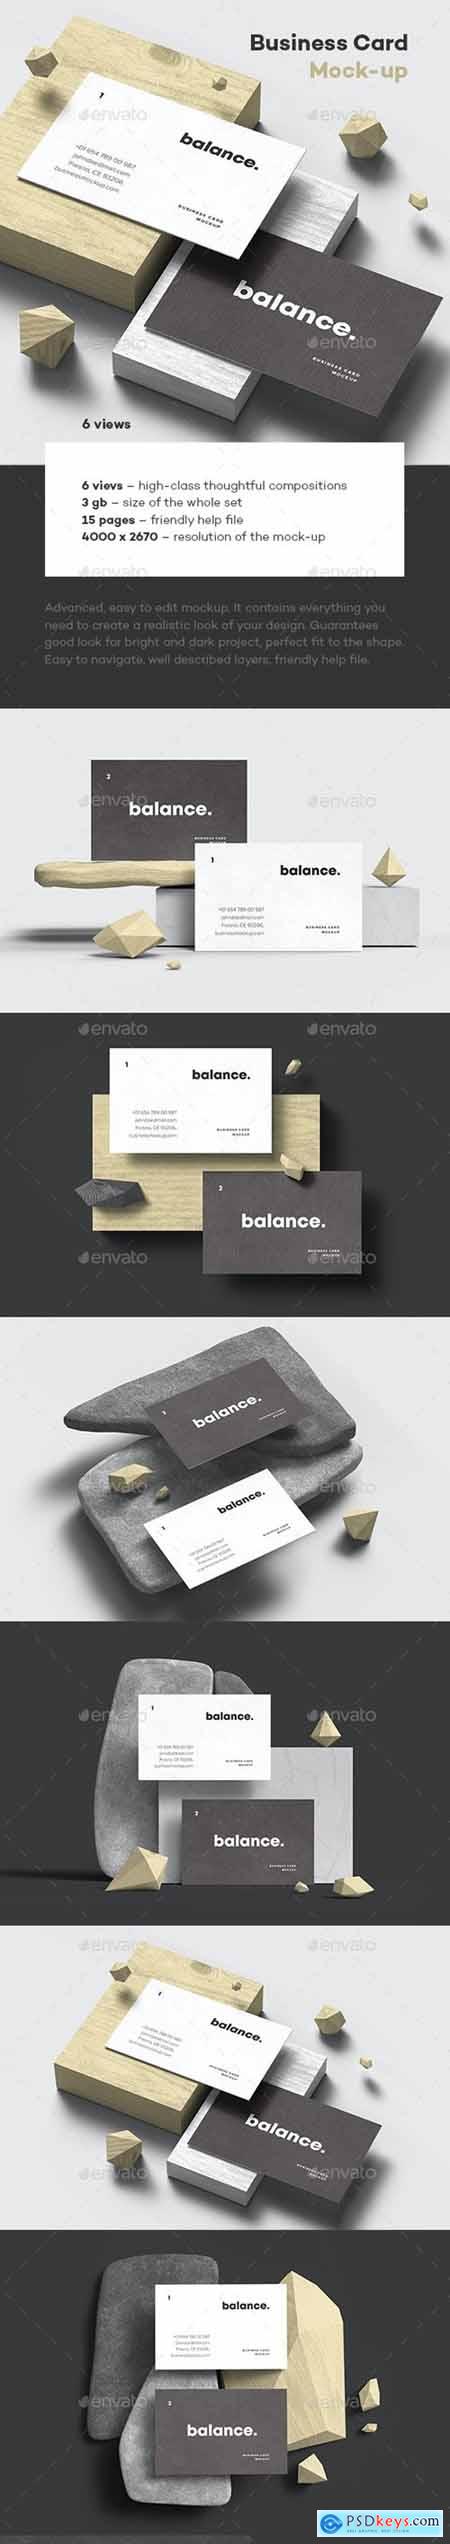 Business Card Mock-up 85x55 27958633